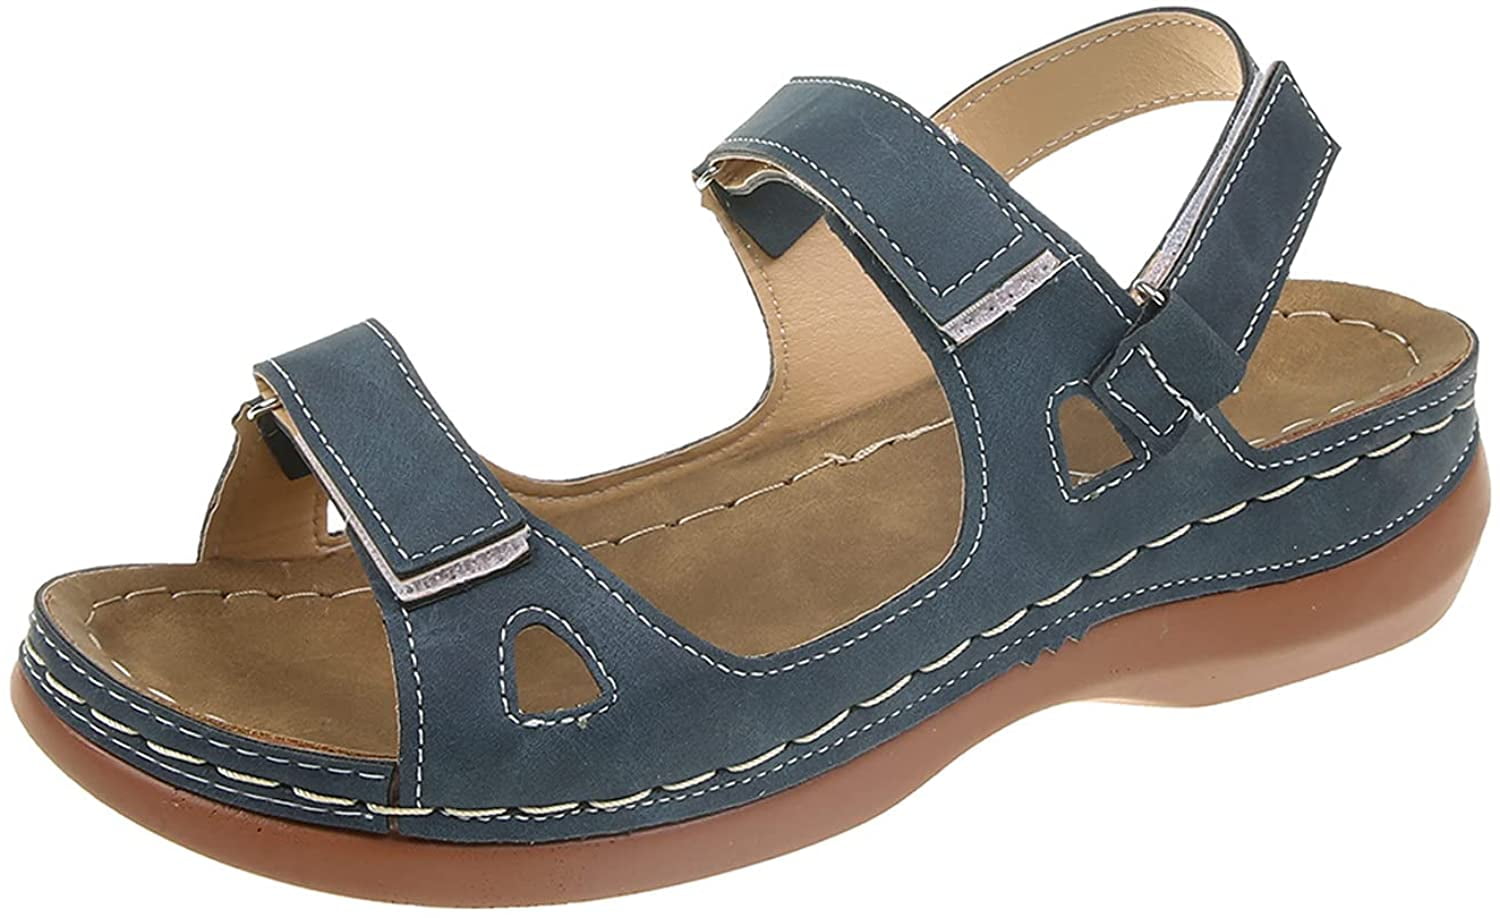 Kurv flyde tidsskrift Womens Walking Sandals – Comfortable Stylish Athletic Sandals with Arch  Support, for Hiking, Outdoors, Travel, Sports - Walmart.com